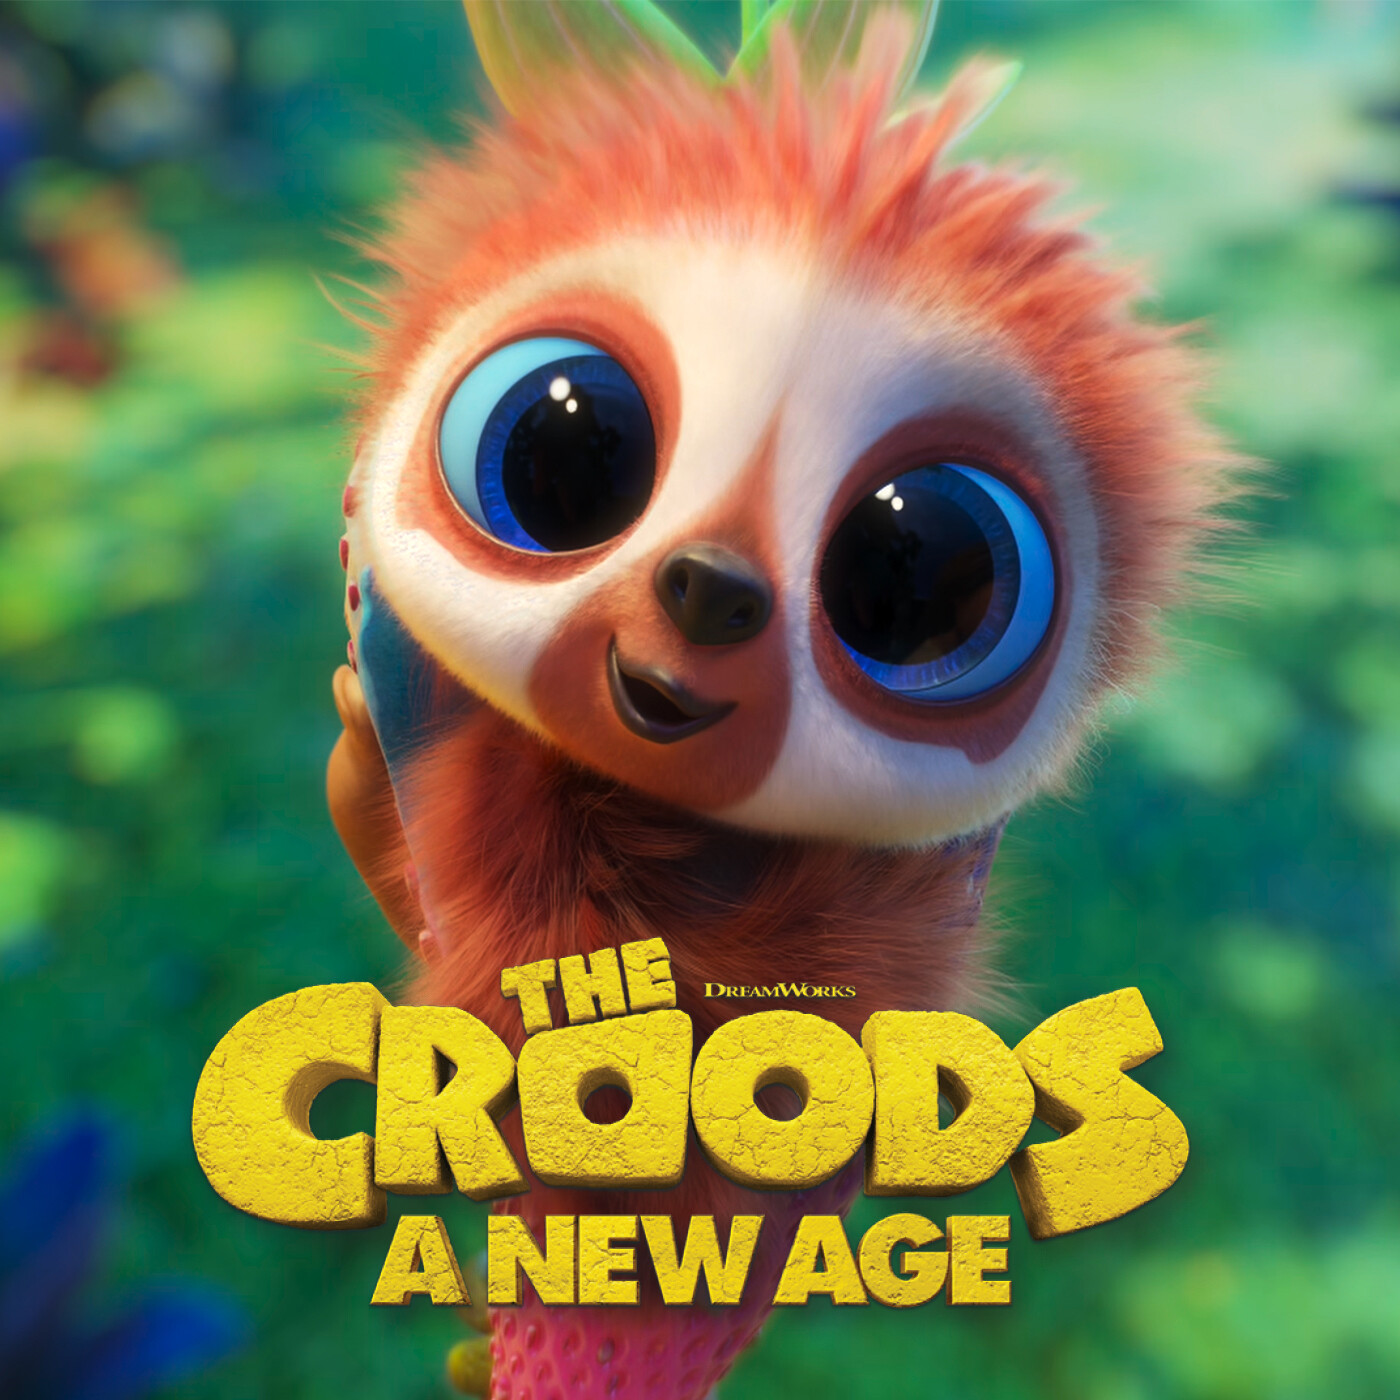 Croods A New Age - Baby Belt "Watch"